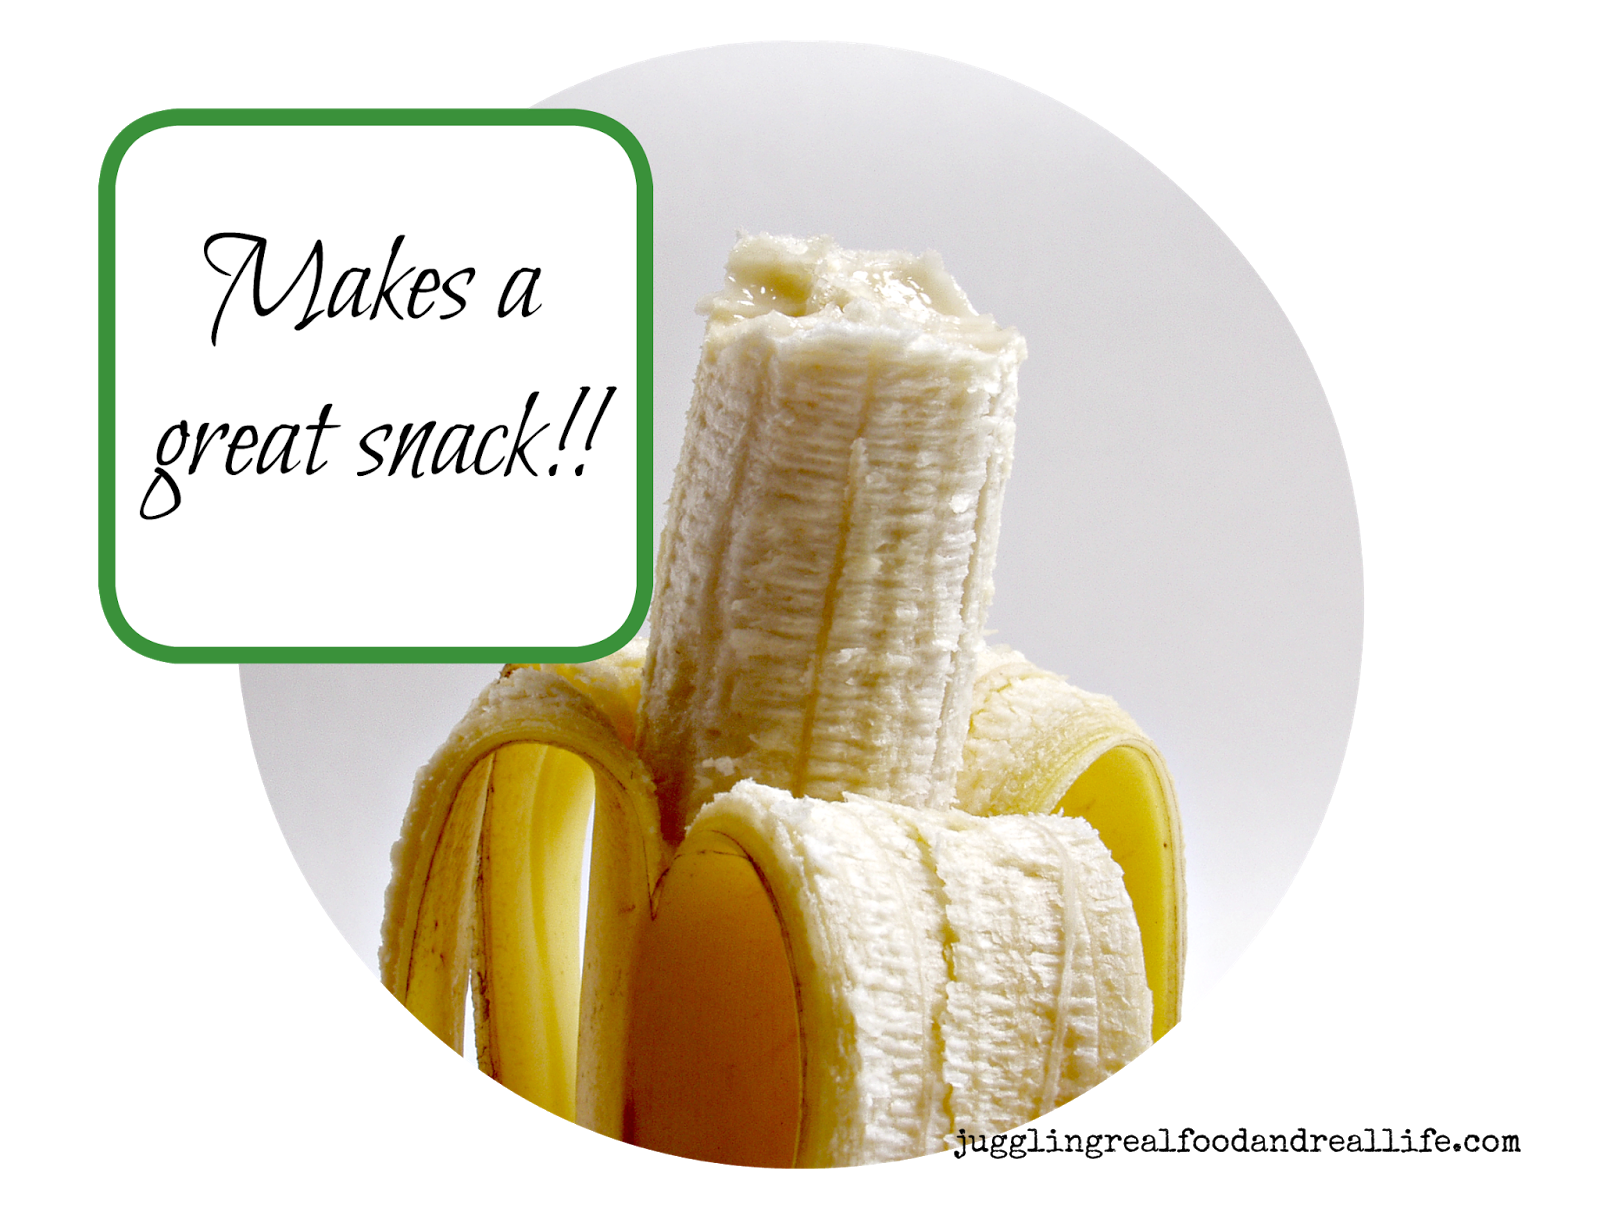 Rethink Your After Sports Snacks